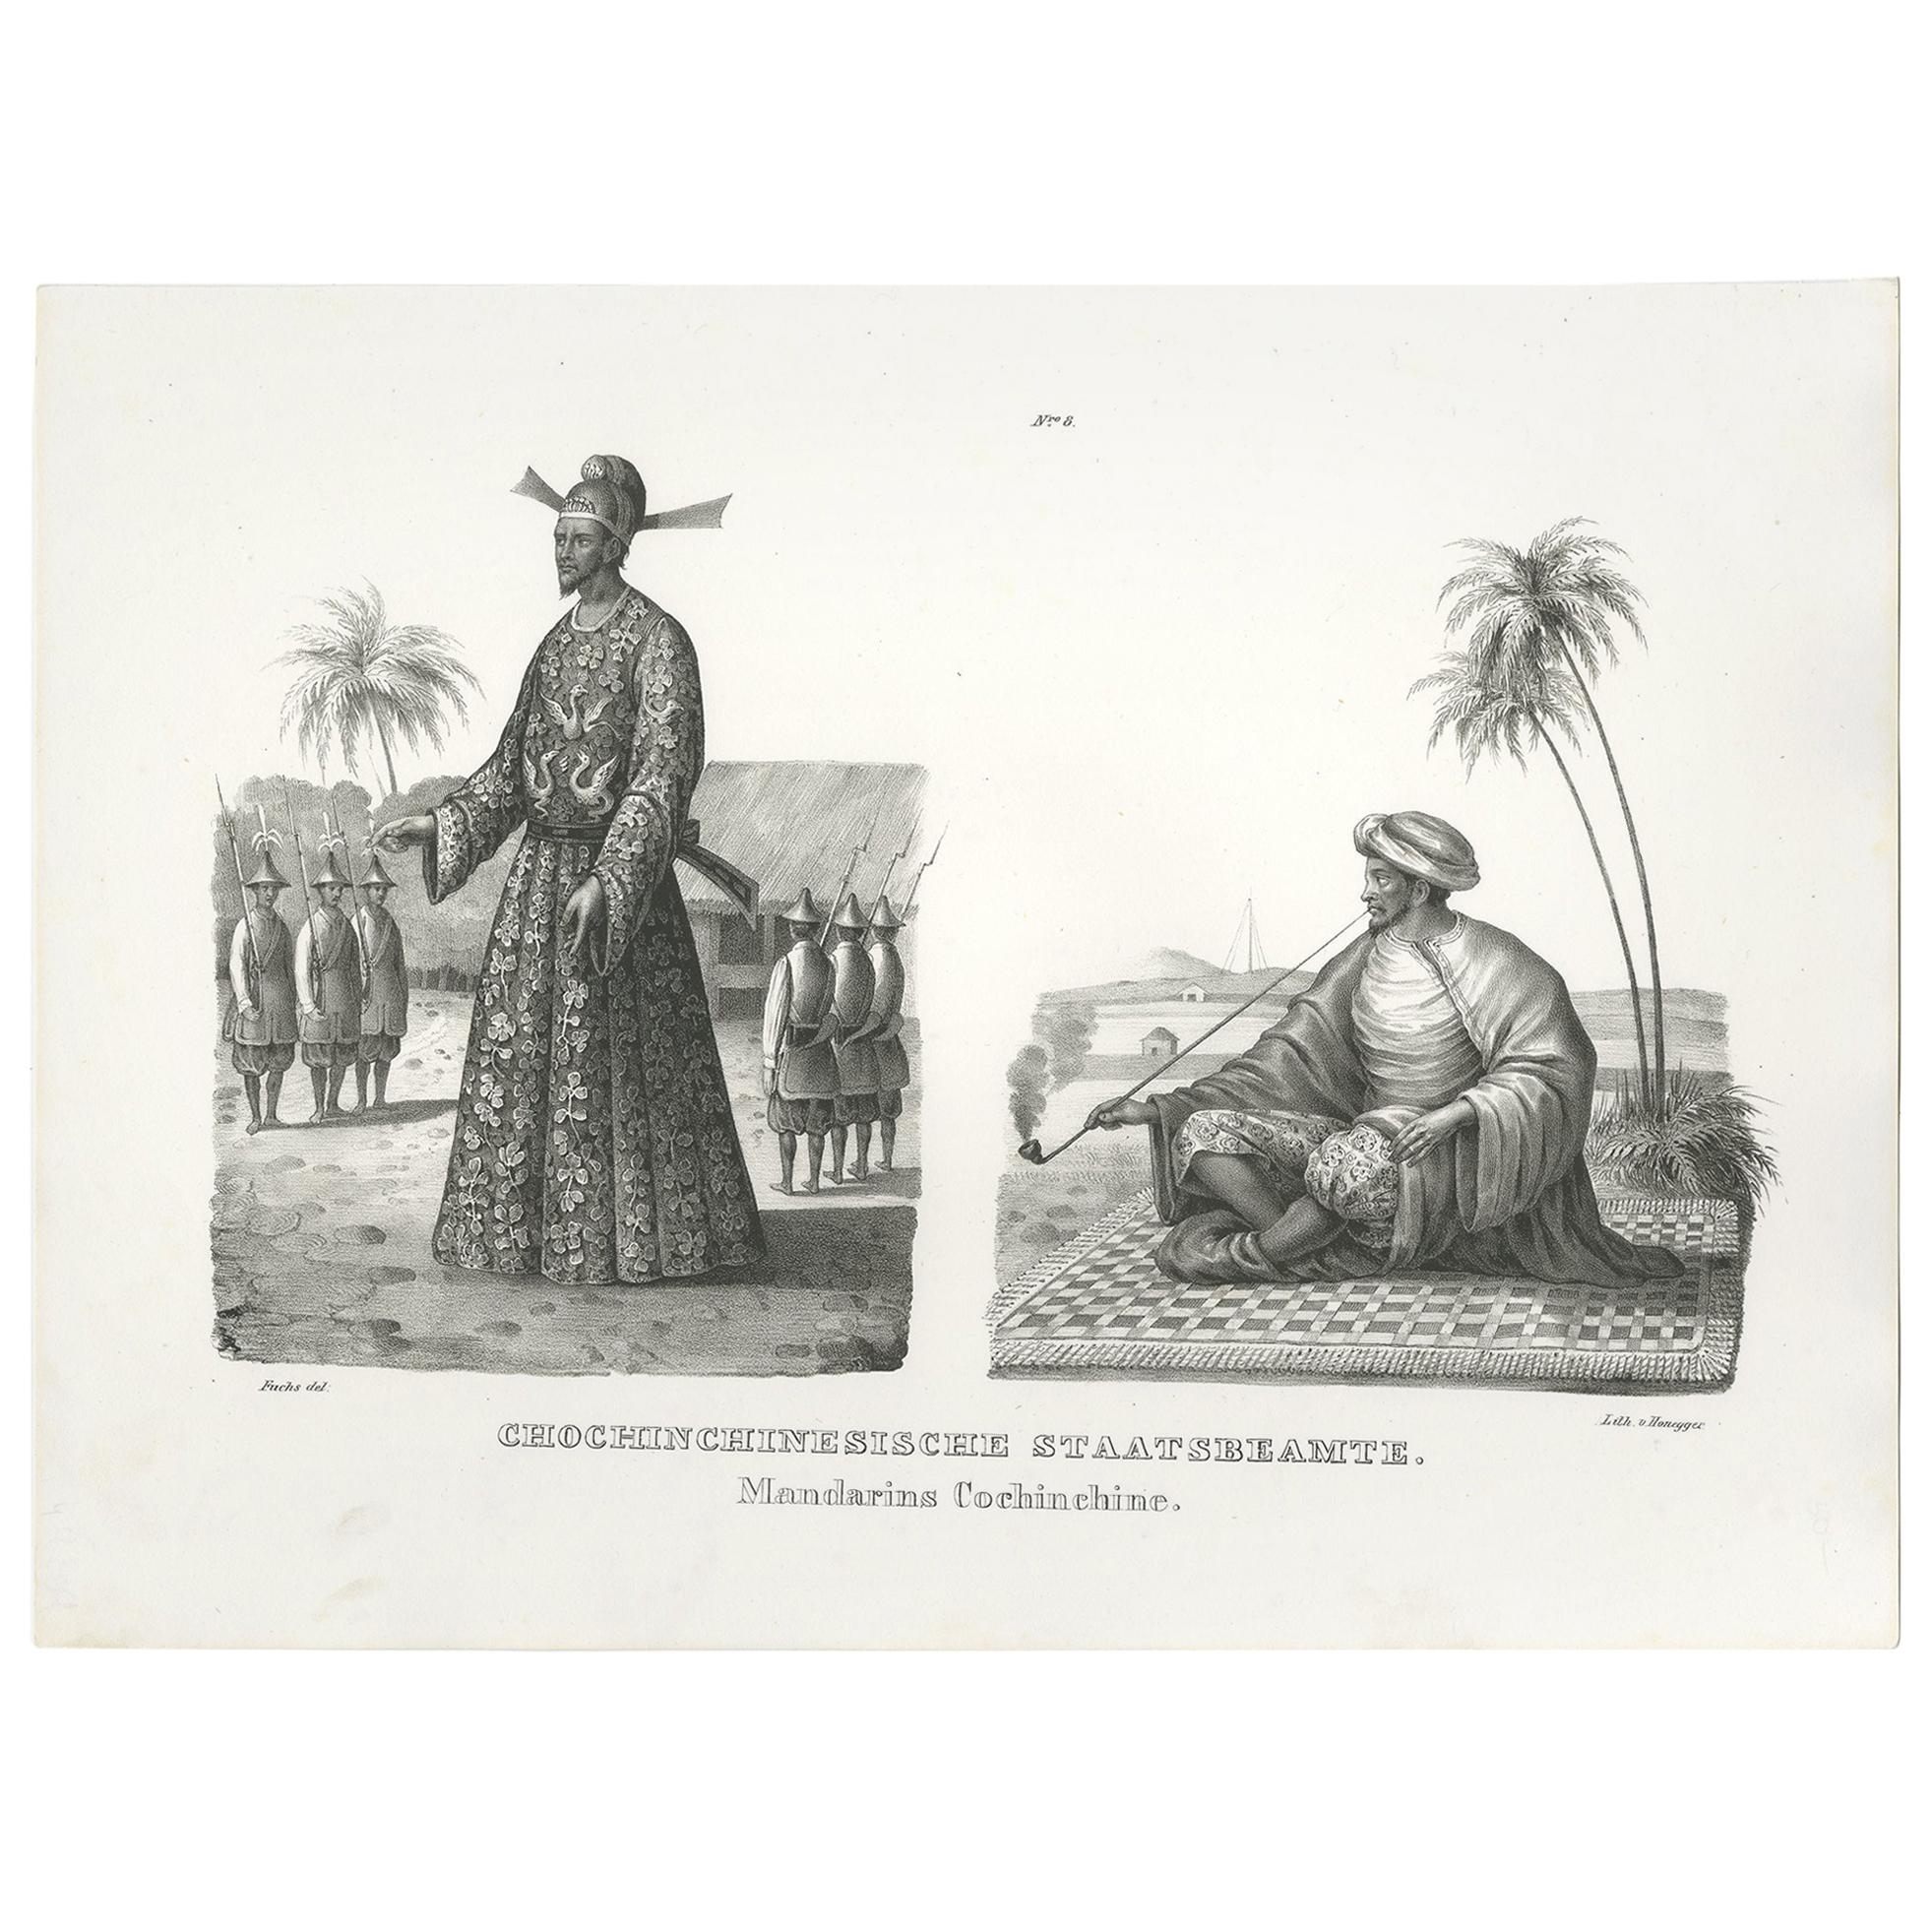 Antique Print of Mandarins from Cochinchina by Honegger, 1845